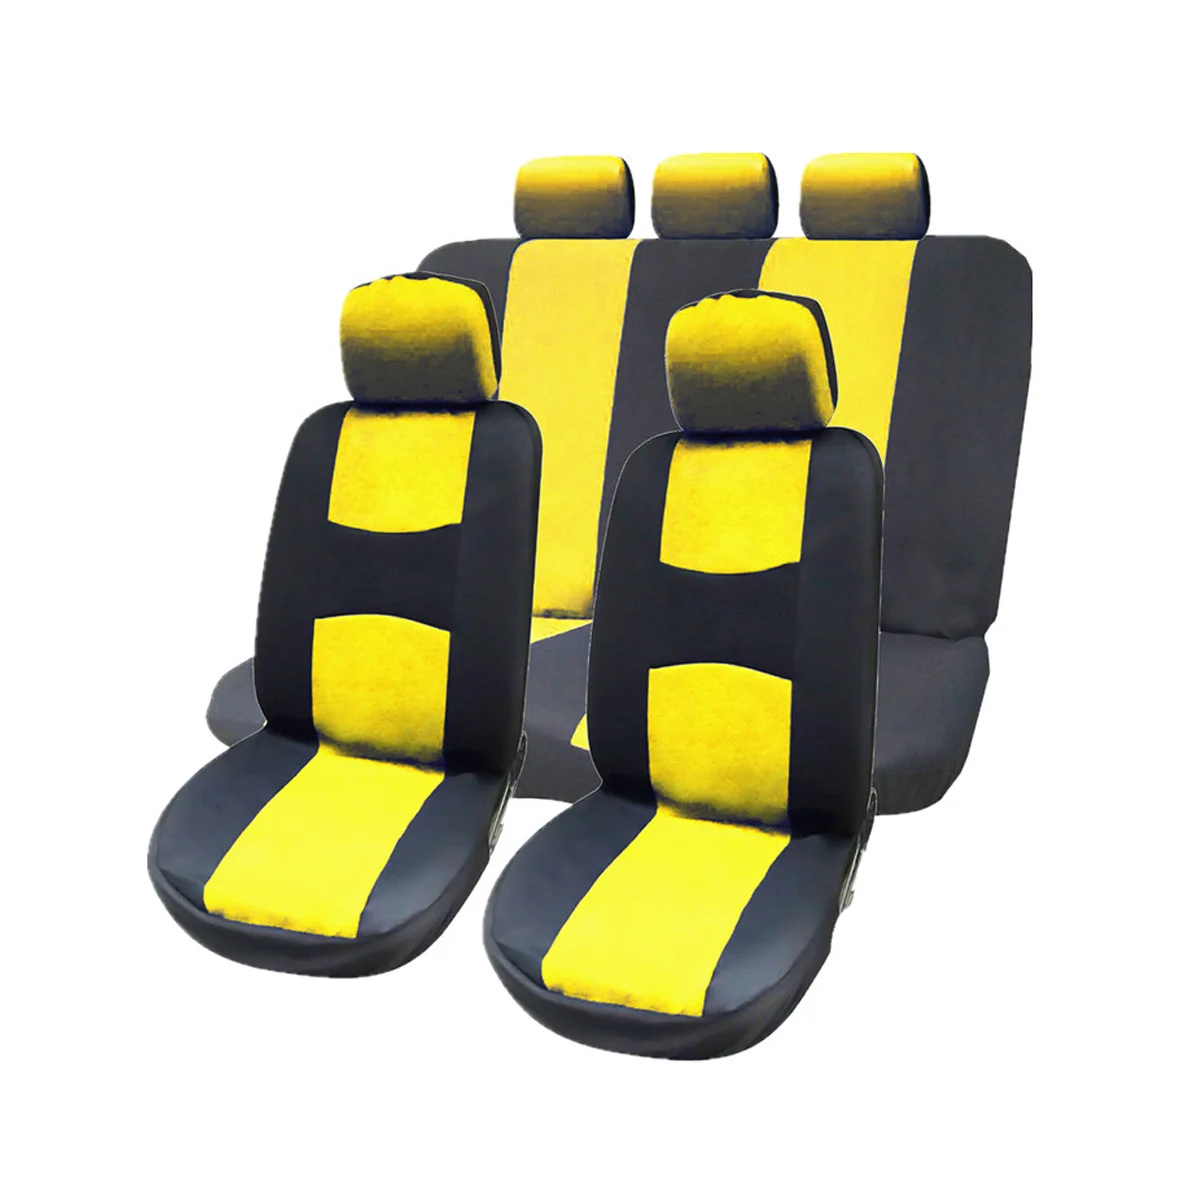 

Universal Breathable Mesh Cloth Car Seat Covers with Side Airbag Compatibility and No Tools Required Installation Yellow Color.